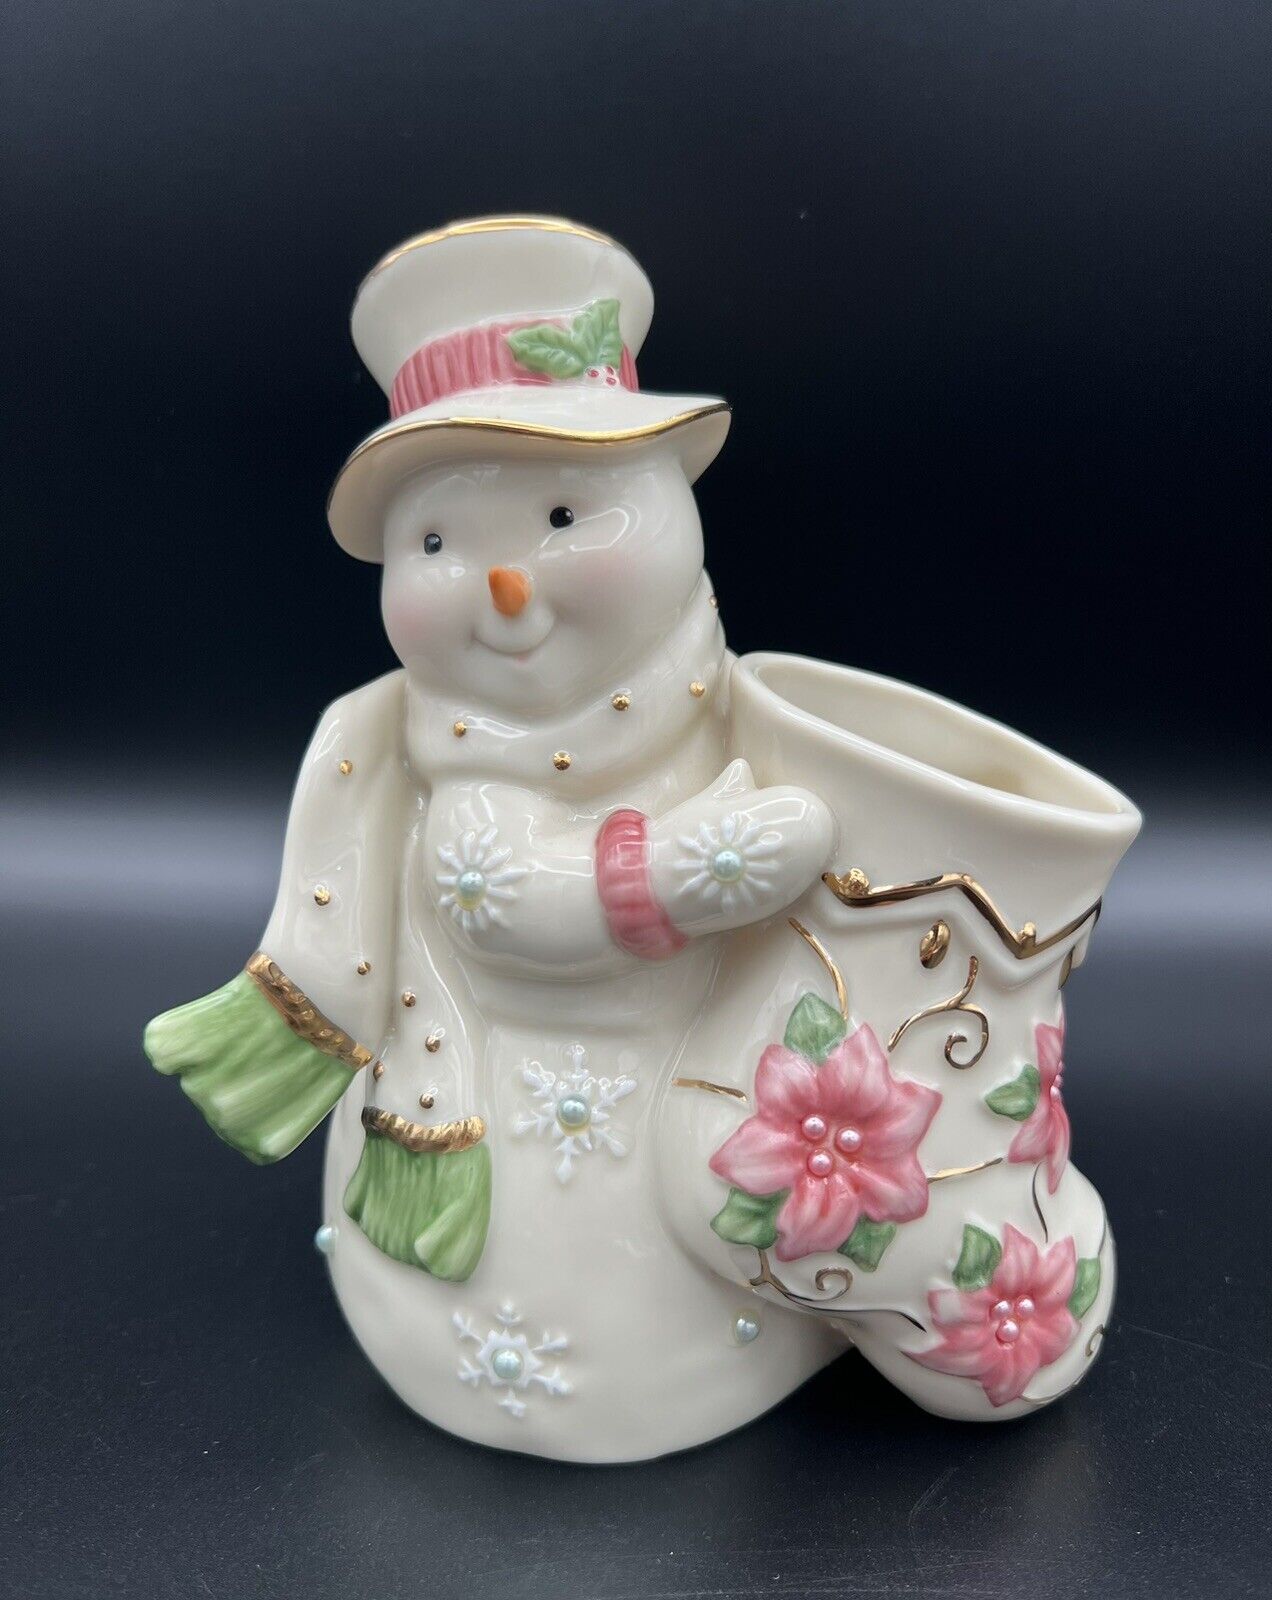 Lenox Petals and Pearls 5.75” Snowman with Stocking Bud Vase Figurine